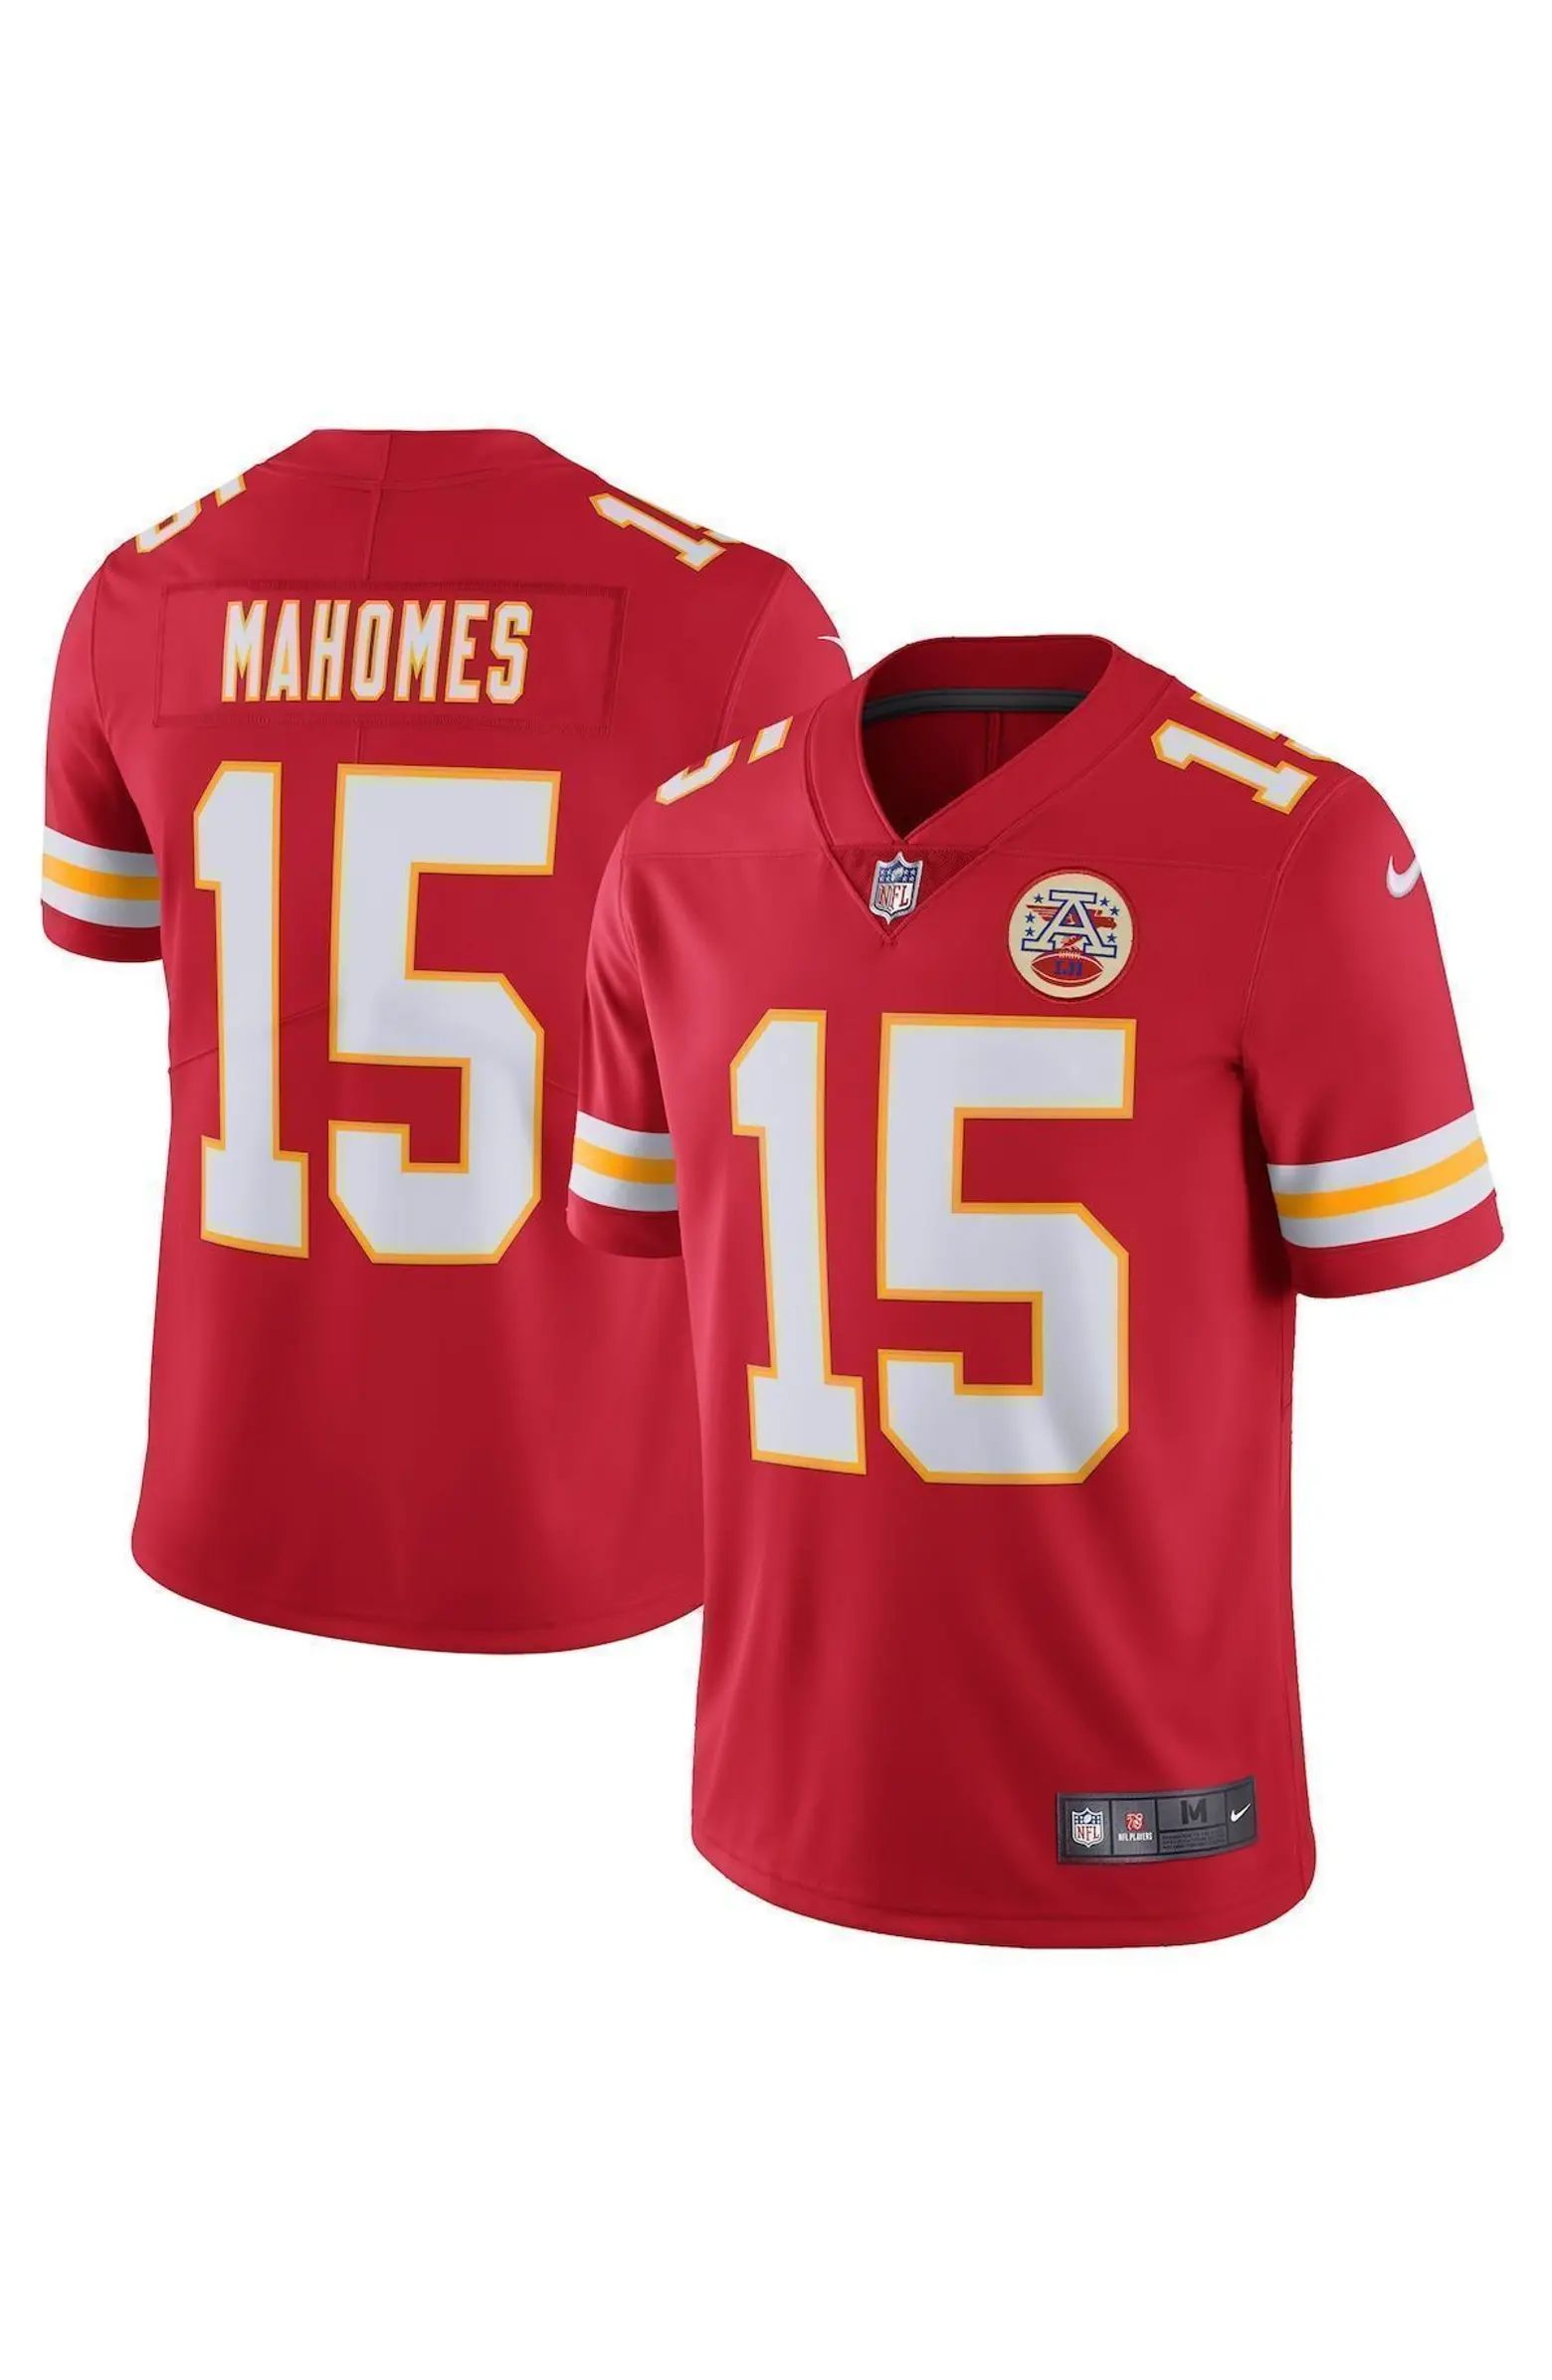 Nike Men's Nike Patrick Mahomes Red Kansas City Chiefs Limited Jersey | Nordstrom | Nordstrom